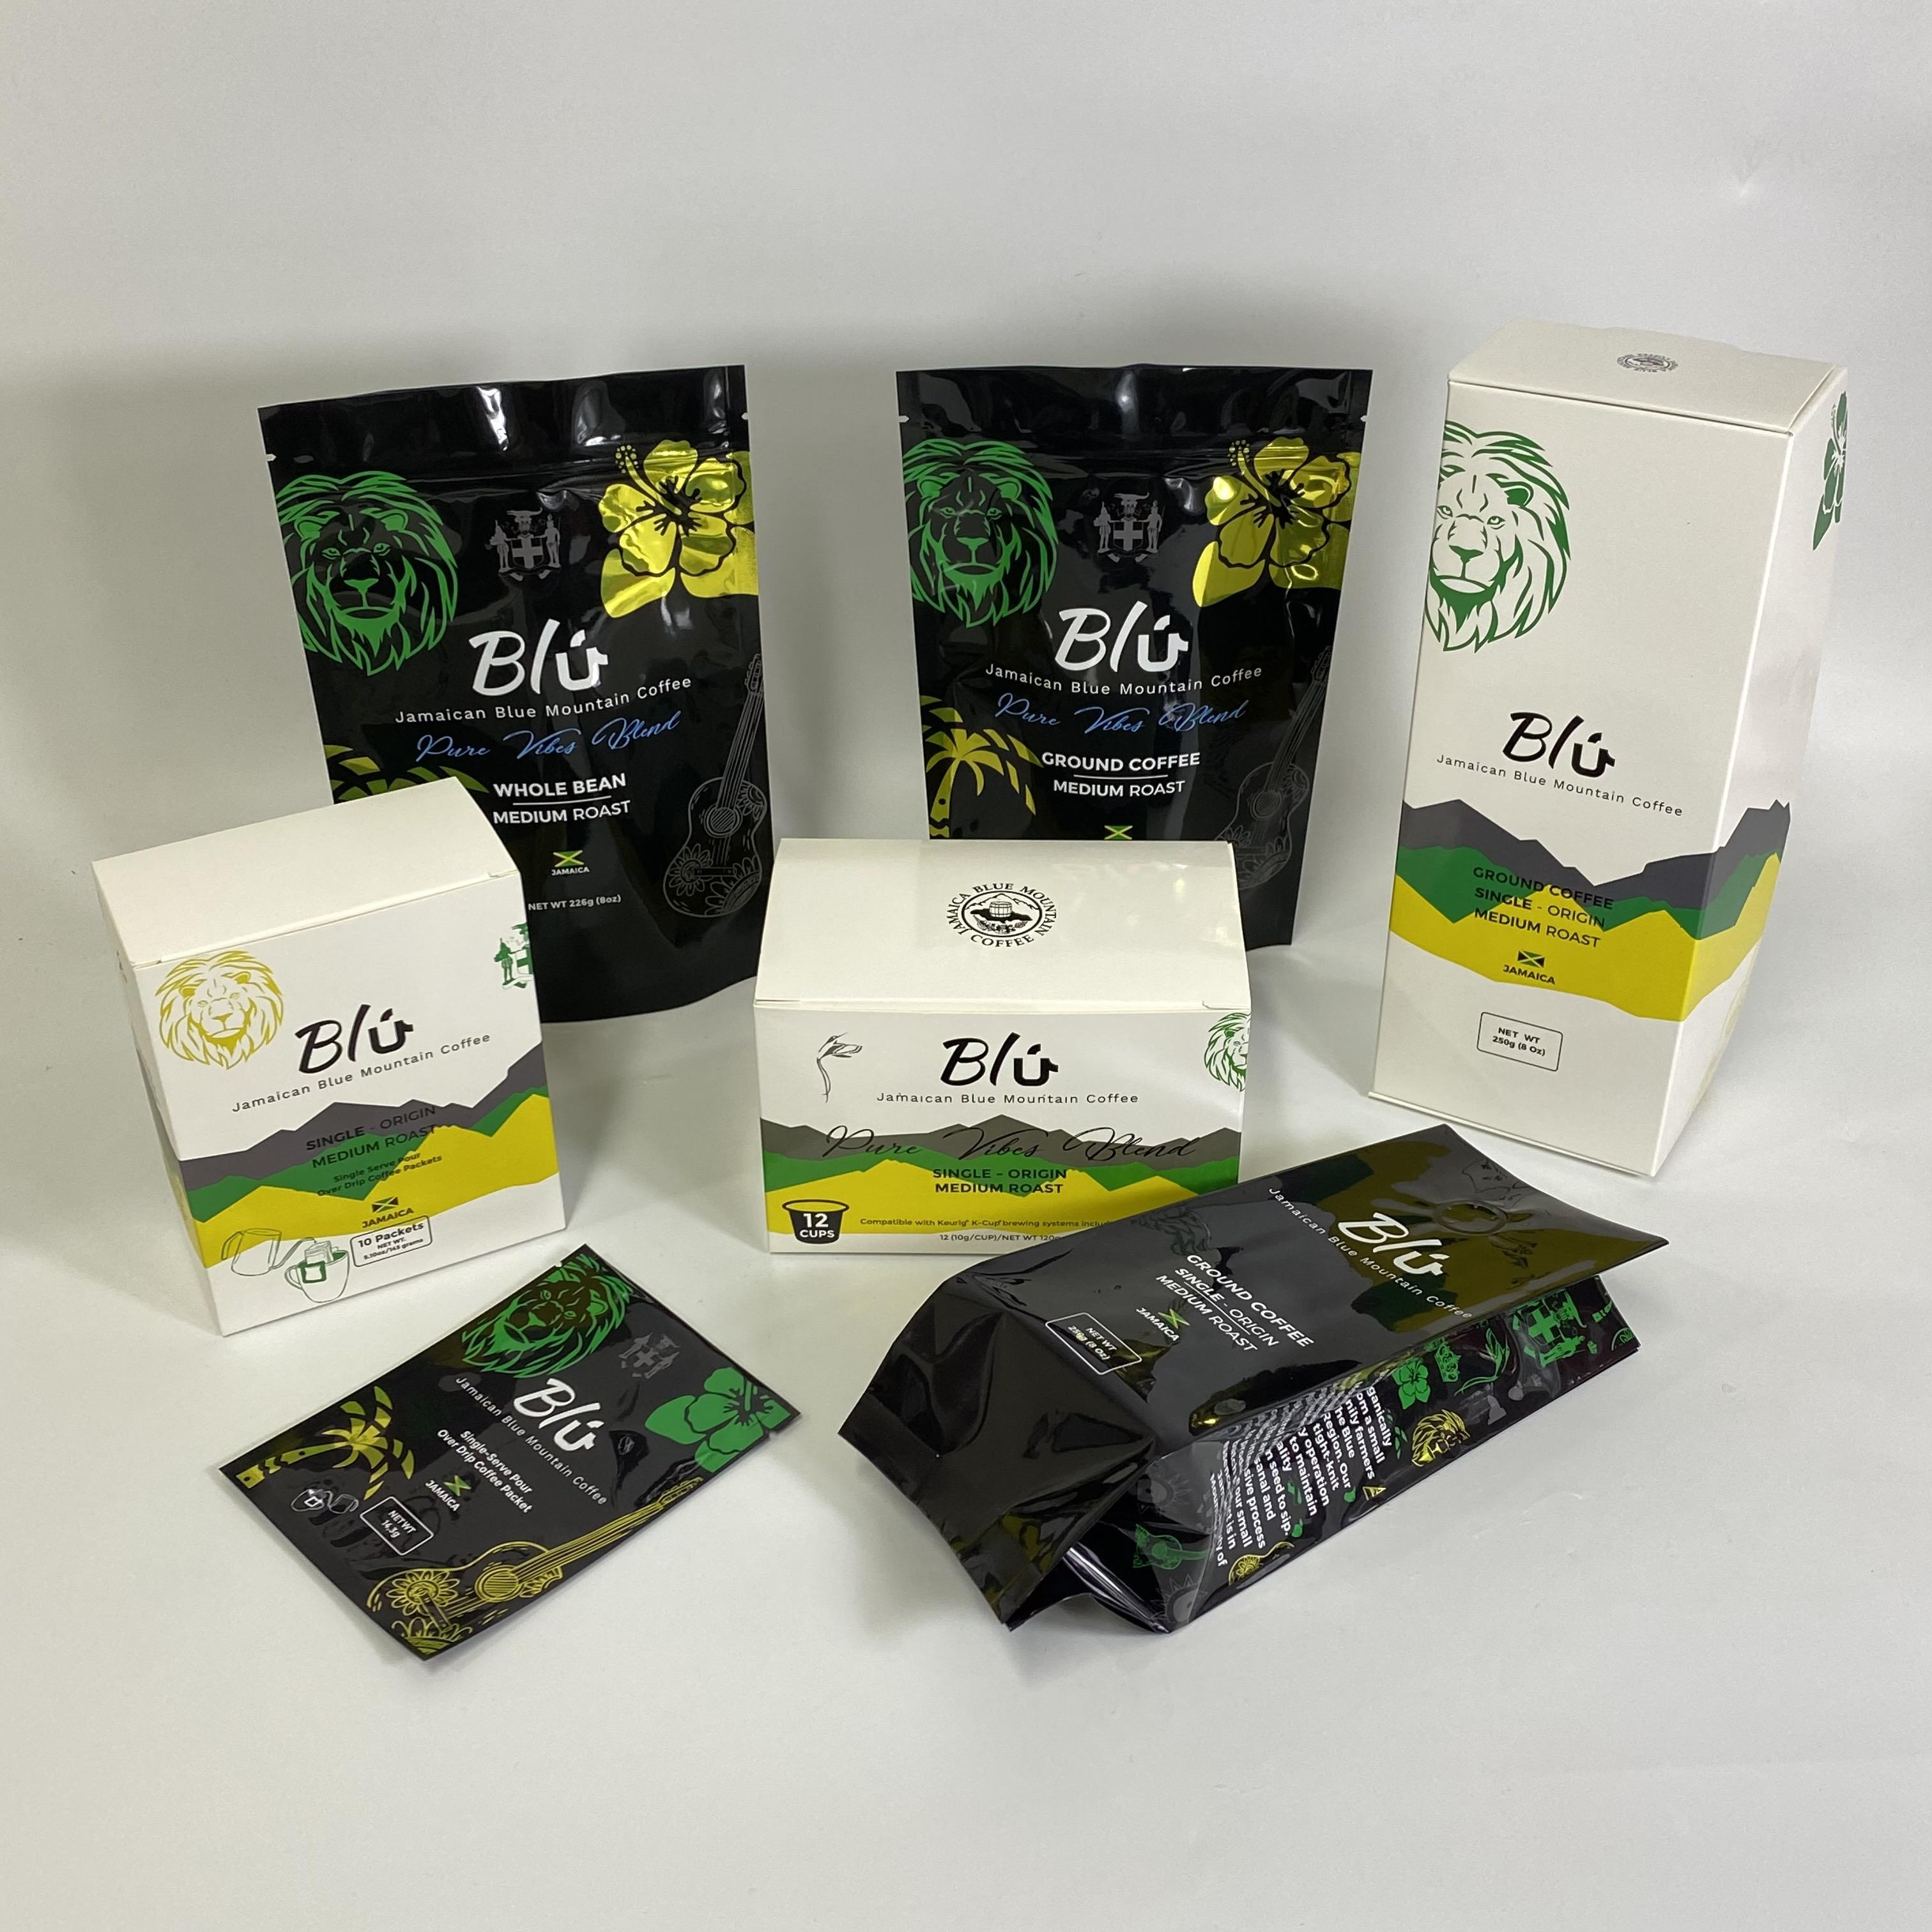 Top Pack offers a wide variety of packaging